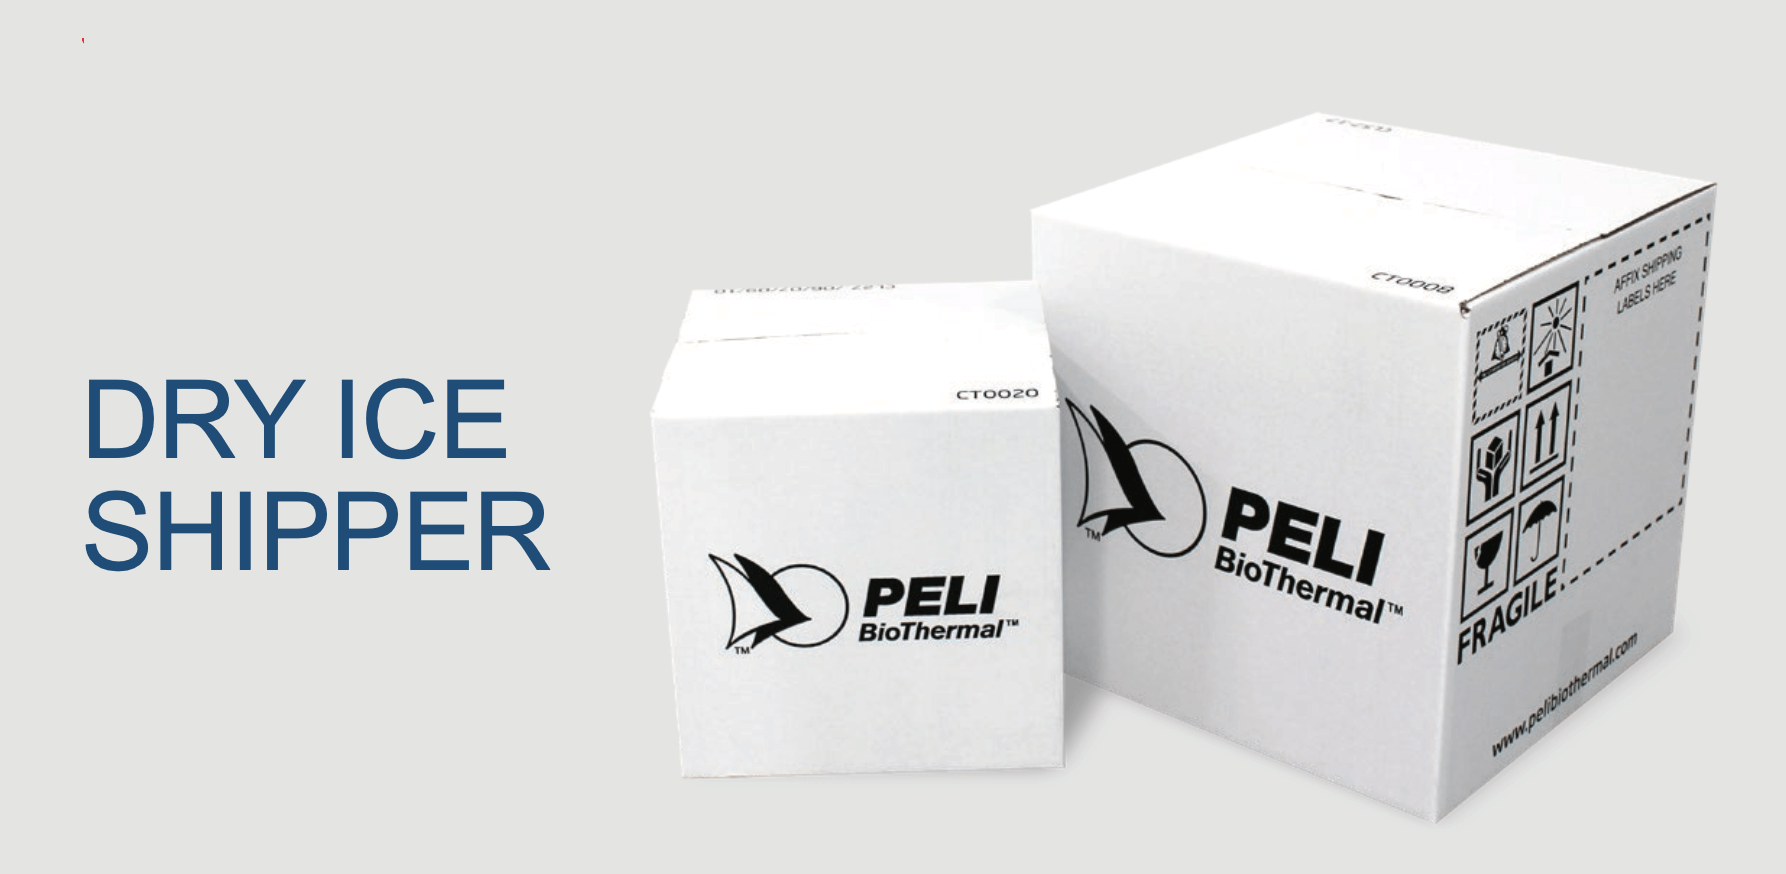 Why Choose Dry Ice Shippers- Peli Biothermal